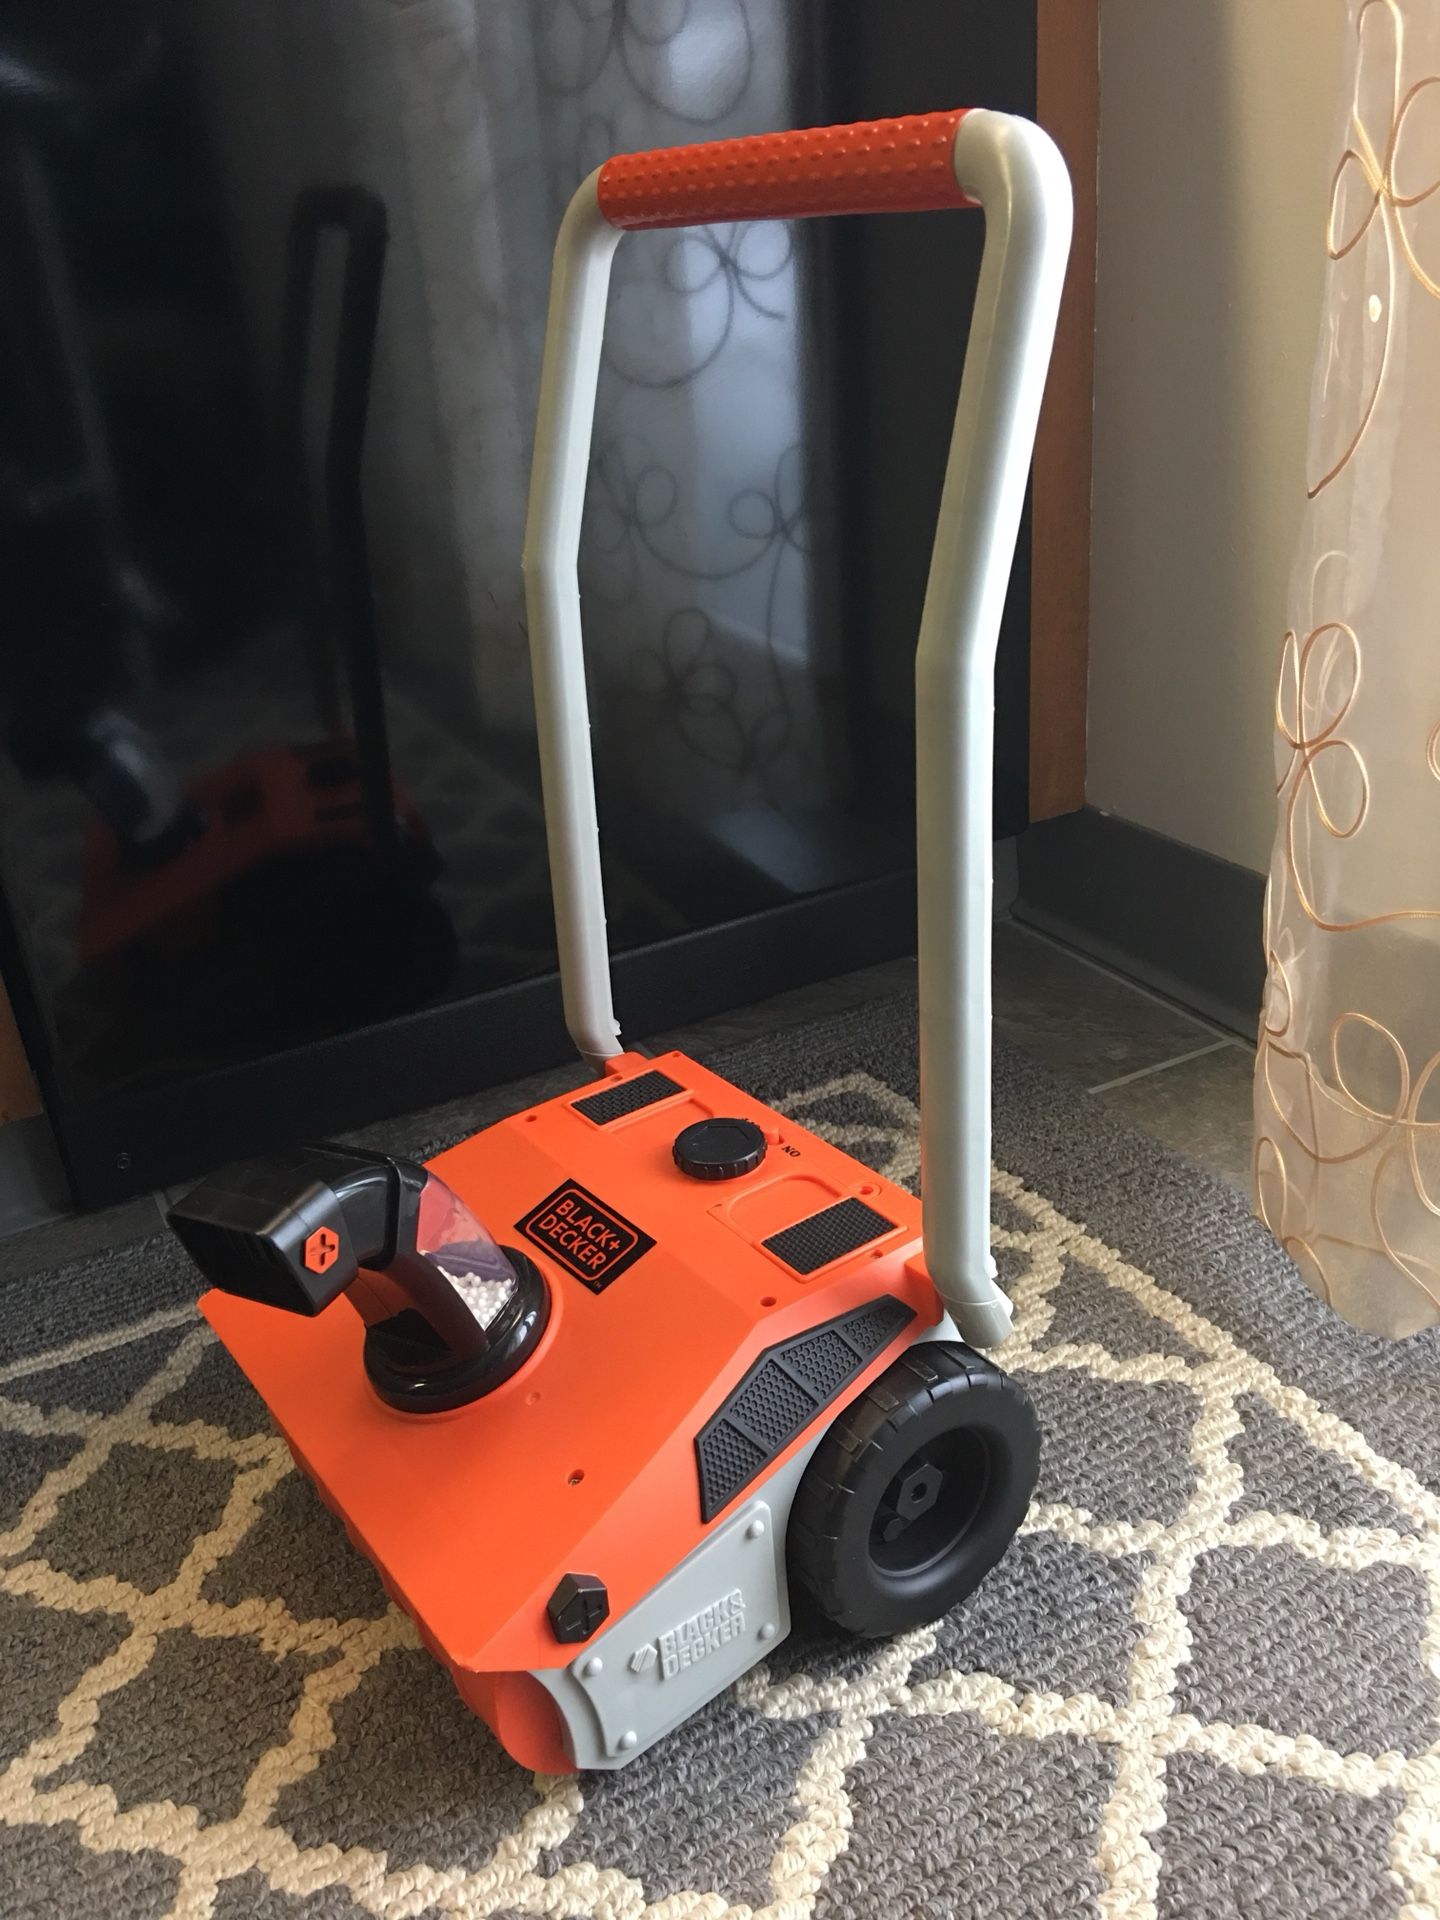 Black & Decker toy snow blower with sounds, sorry not willing to ship